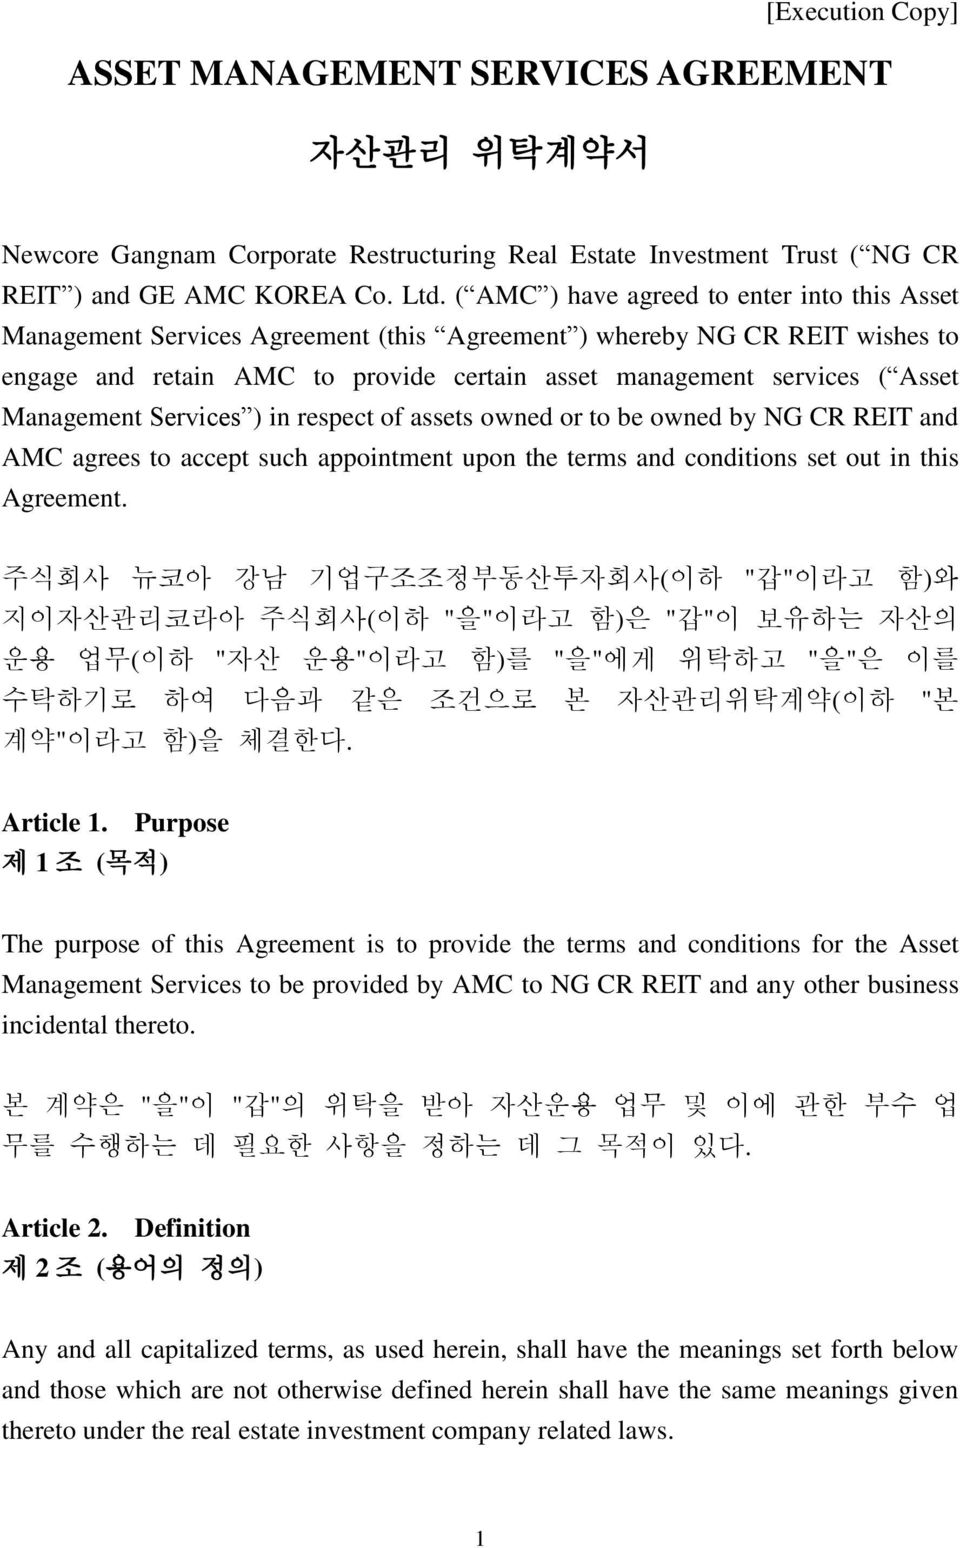 Management Services ) in respect of assets owned or to be owned by NG CR REIT and AMC agrees to accept such appointment upon the terms and conditions set out in this Agreement.